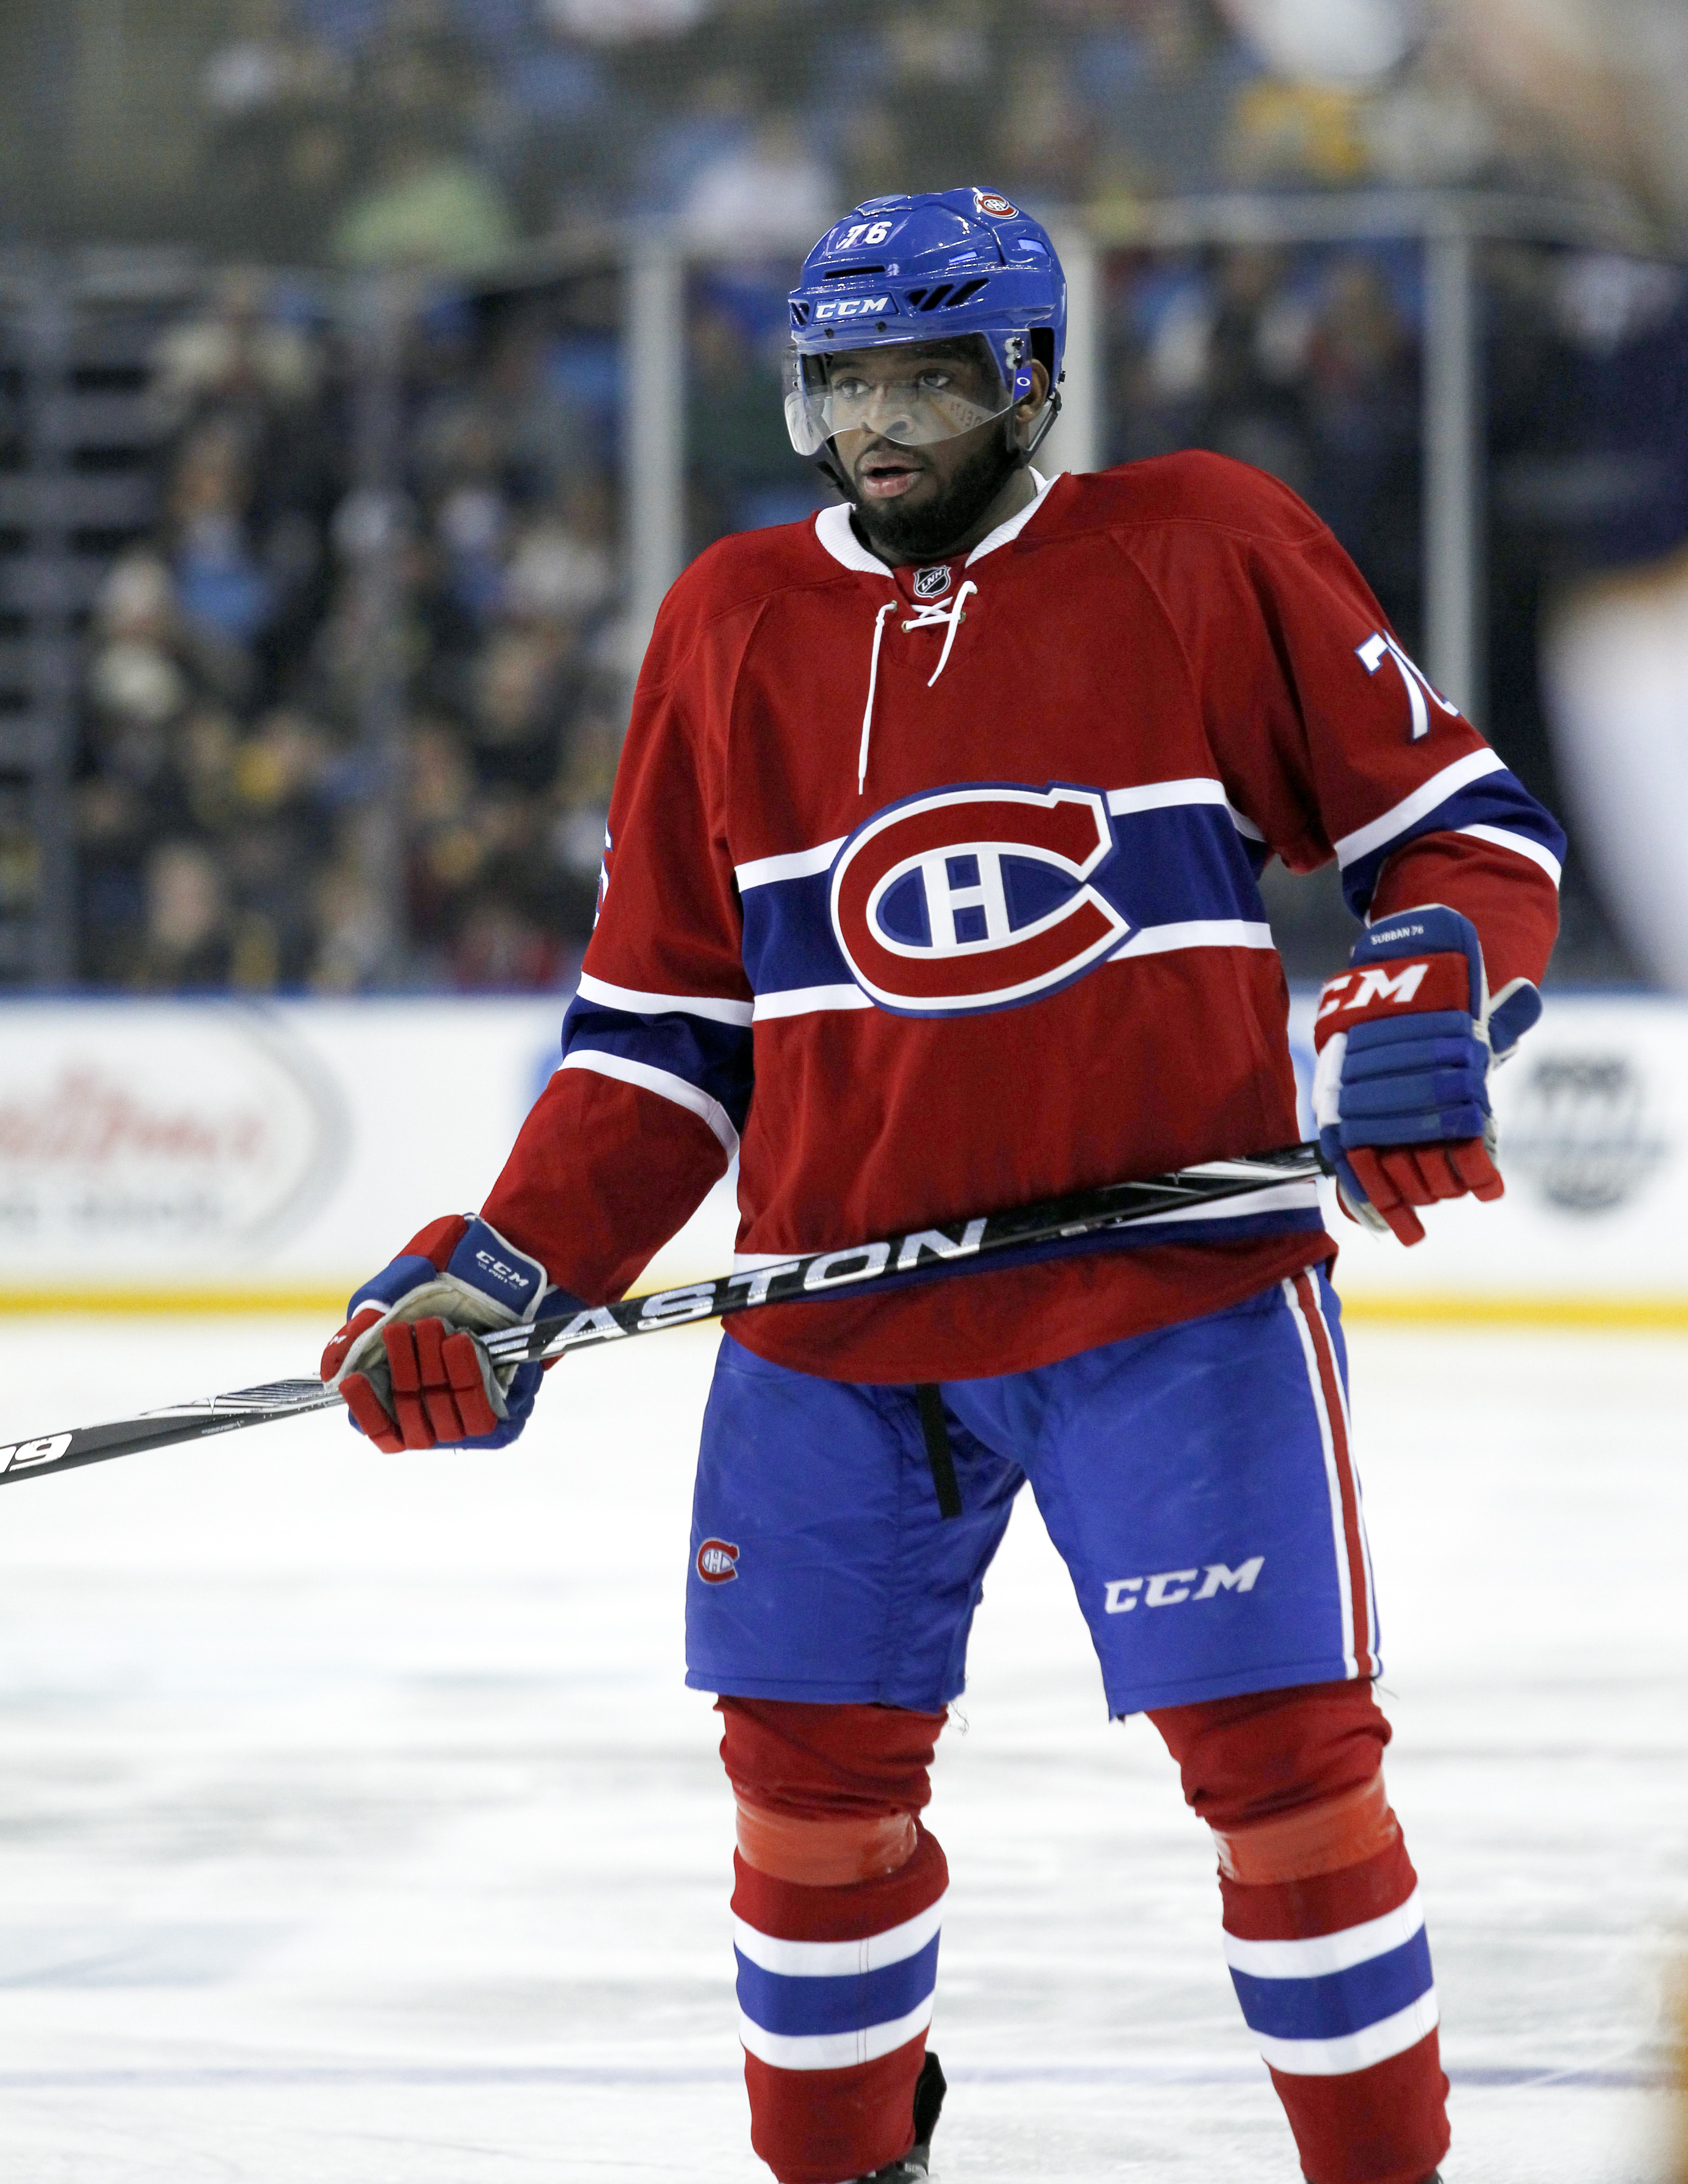 How every NHL team could trade for P.K. Subban